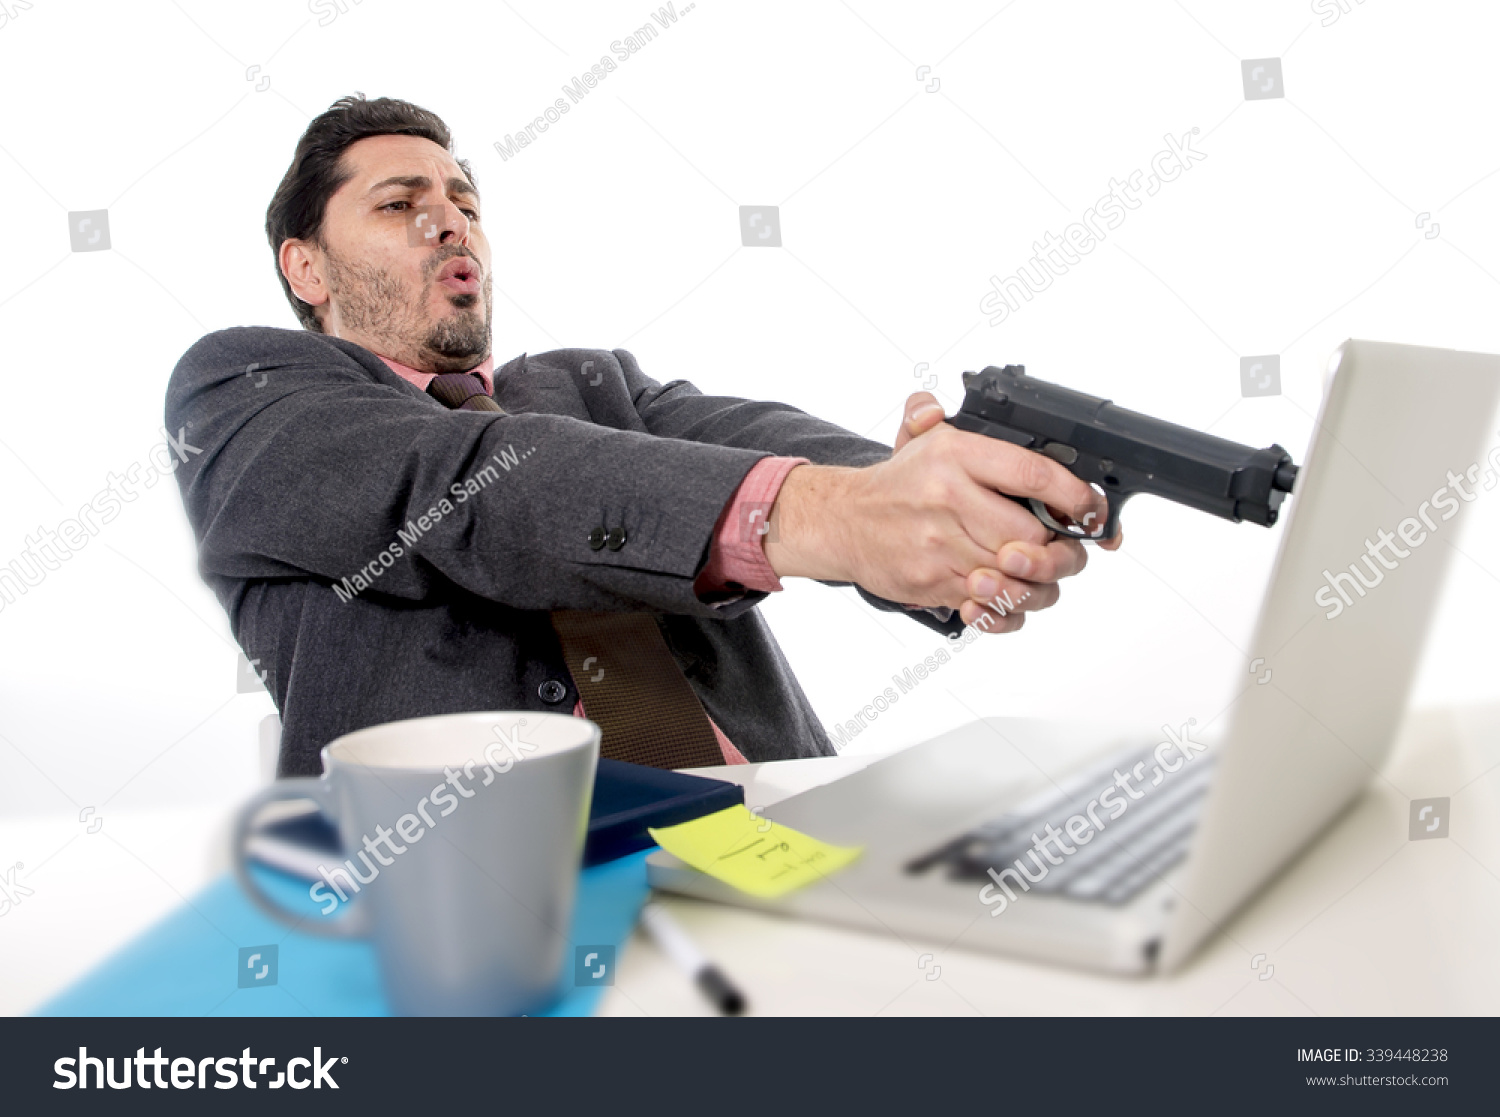 stock-photo-young-businessman-in-suit-and-tie-sitting-at-office-desk-working-on-computer-pointing-gun-to-339448238.jpg